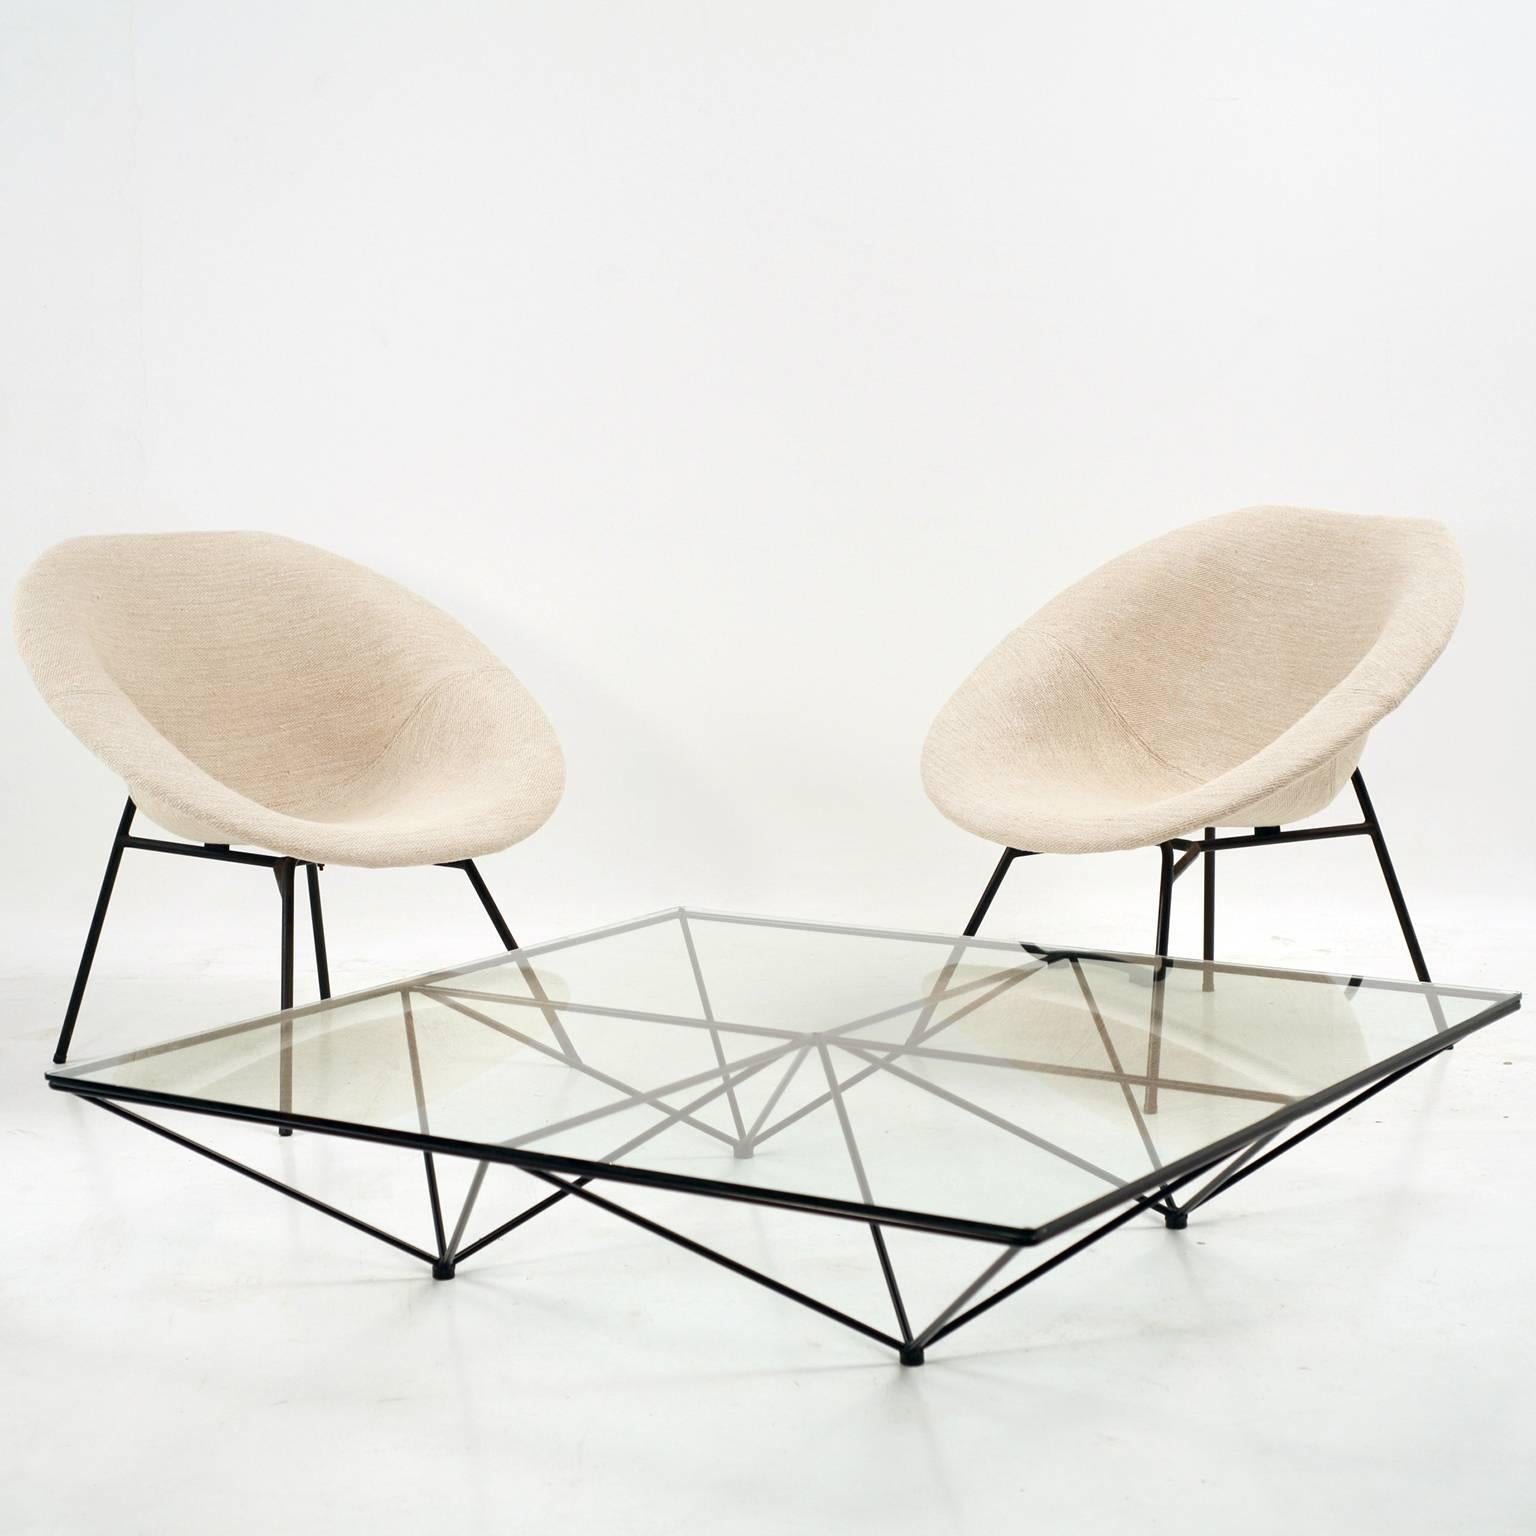 Architectural and rare coffee table Alanda by Paolo Piva for B&B Italia. Black wire metal frame diamond shape with thick glass top. Frame in very good original condition. The glass top is beveled. Some light scratches on the glass.